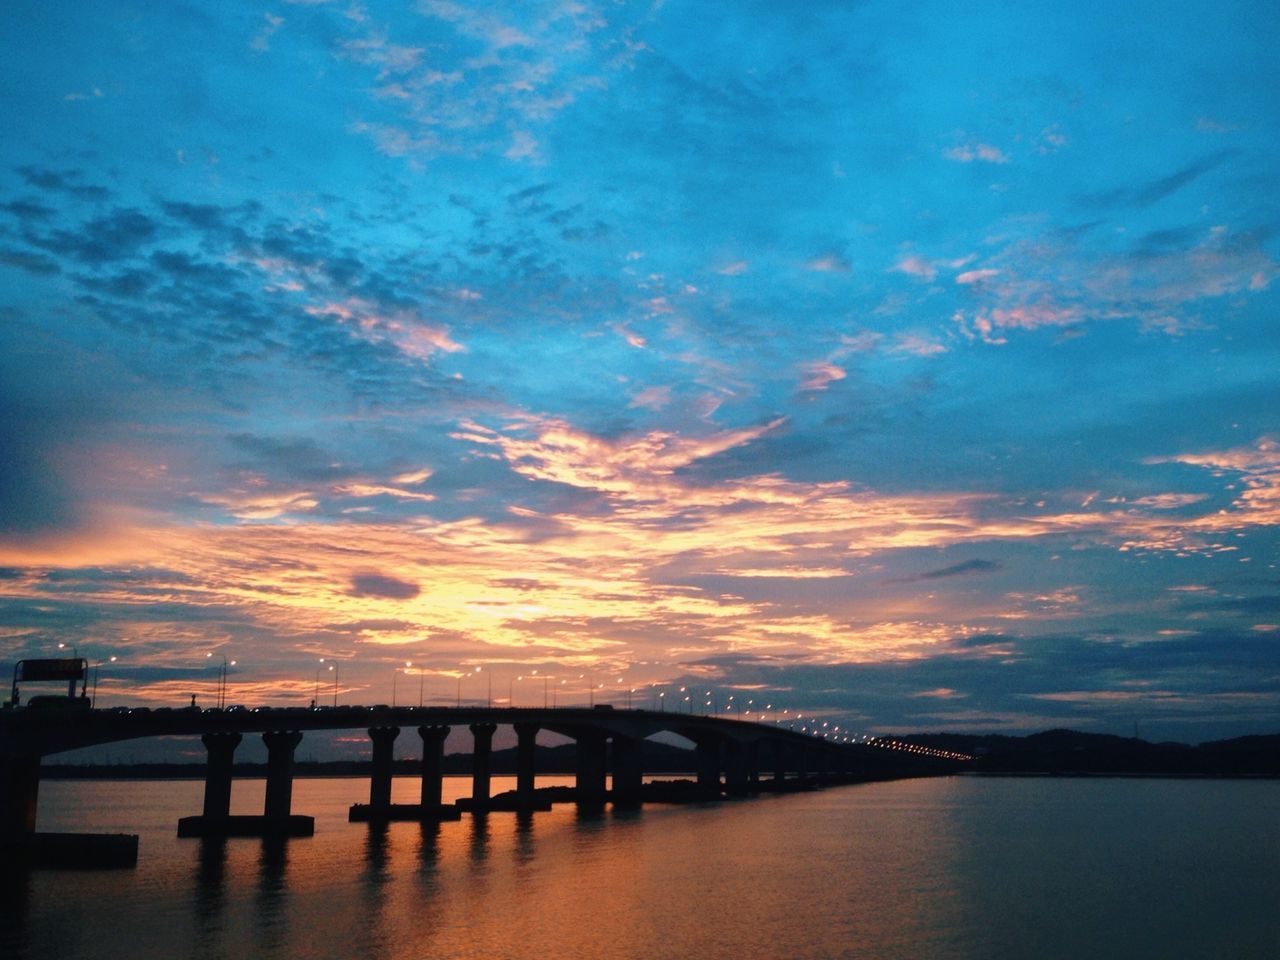 water, sunset, sky, built structure, architecture, waterfront, connection, cloud - sky, bridge - man made structure, tranquility, tranquil scene, reflection, scenics, beauty in nature, pier, river, silhouette, nature, bridge, cloud